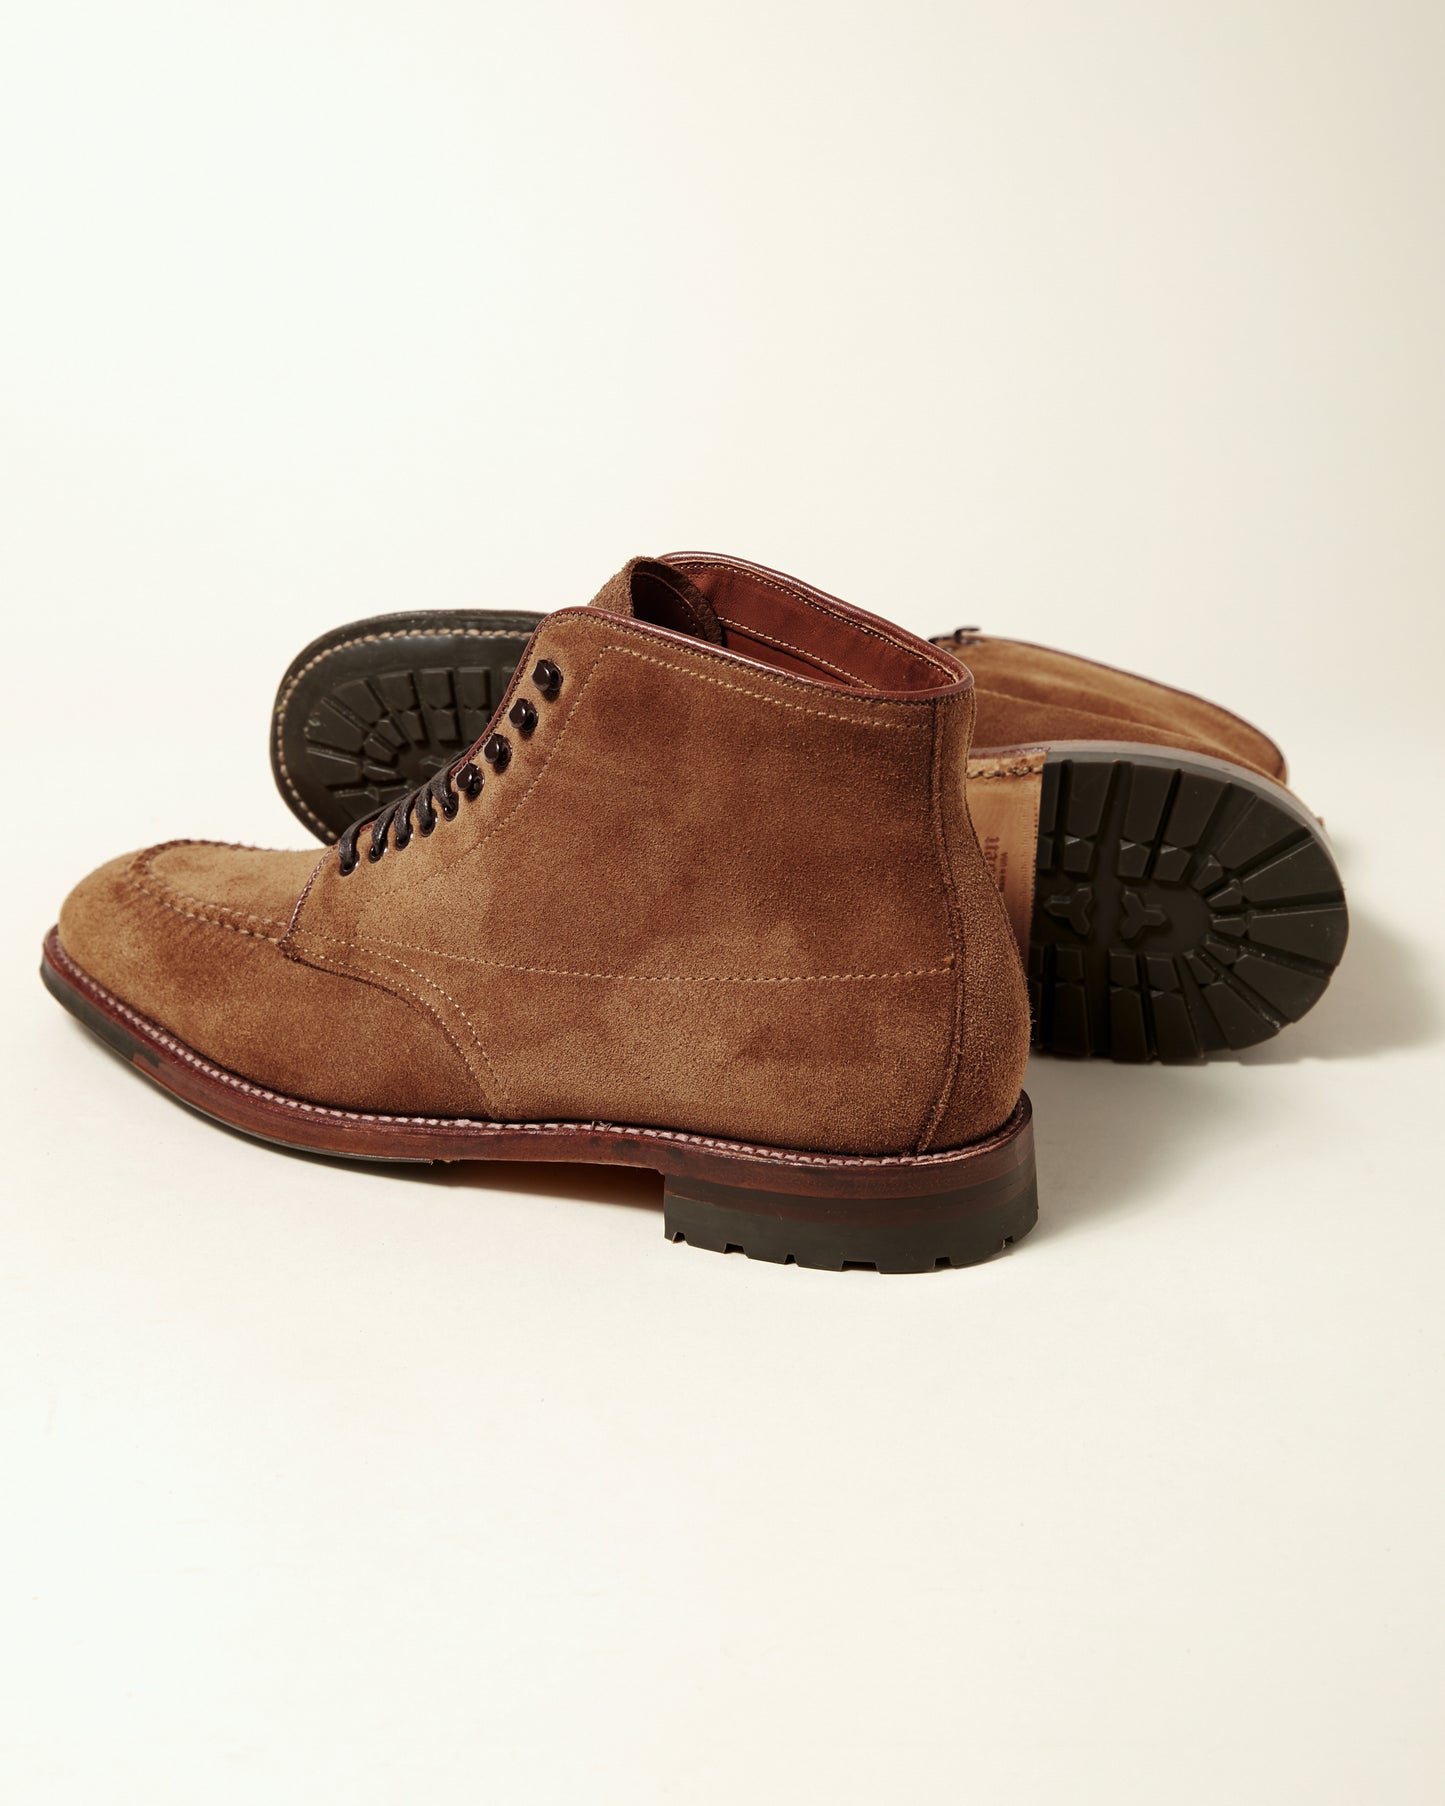 "Denny" Snuff Suede Plaza Last Handsewn Indy Boot